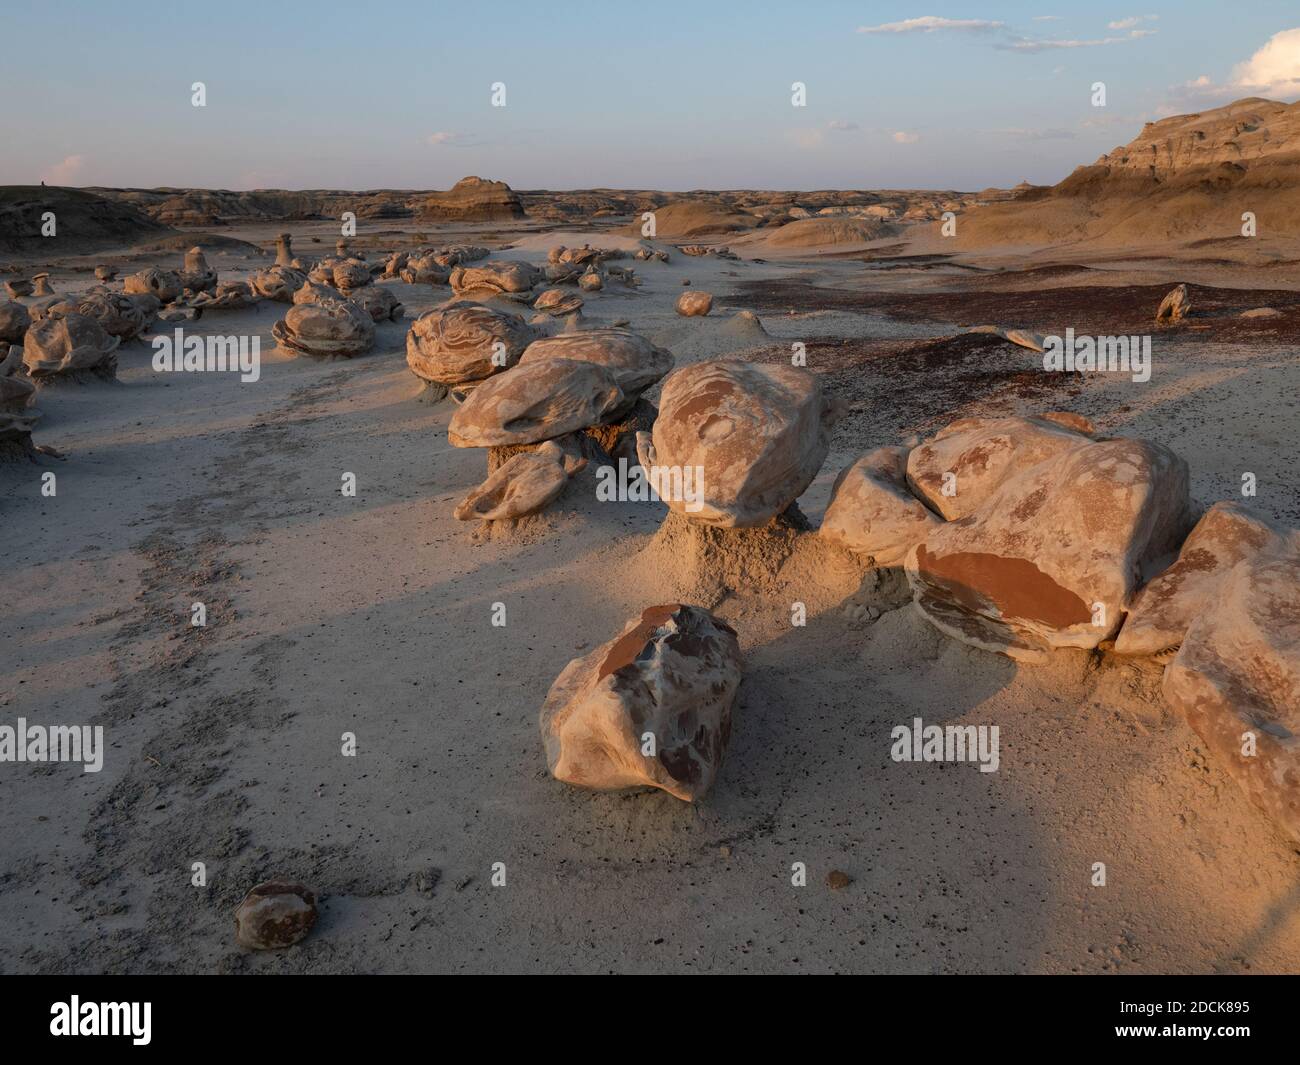 The Cracked Eggs formation in Bisti Badlands in New Mexico photographed at dusk. Stock Photo